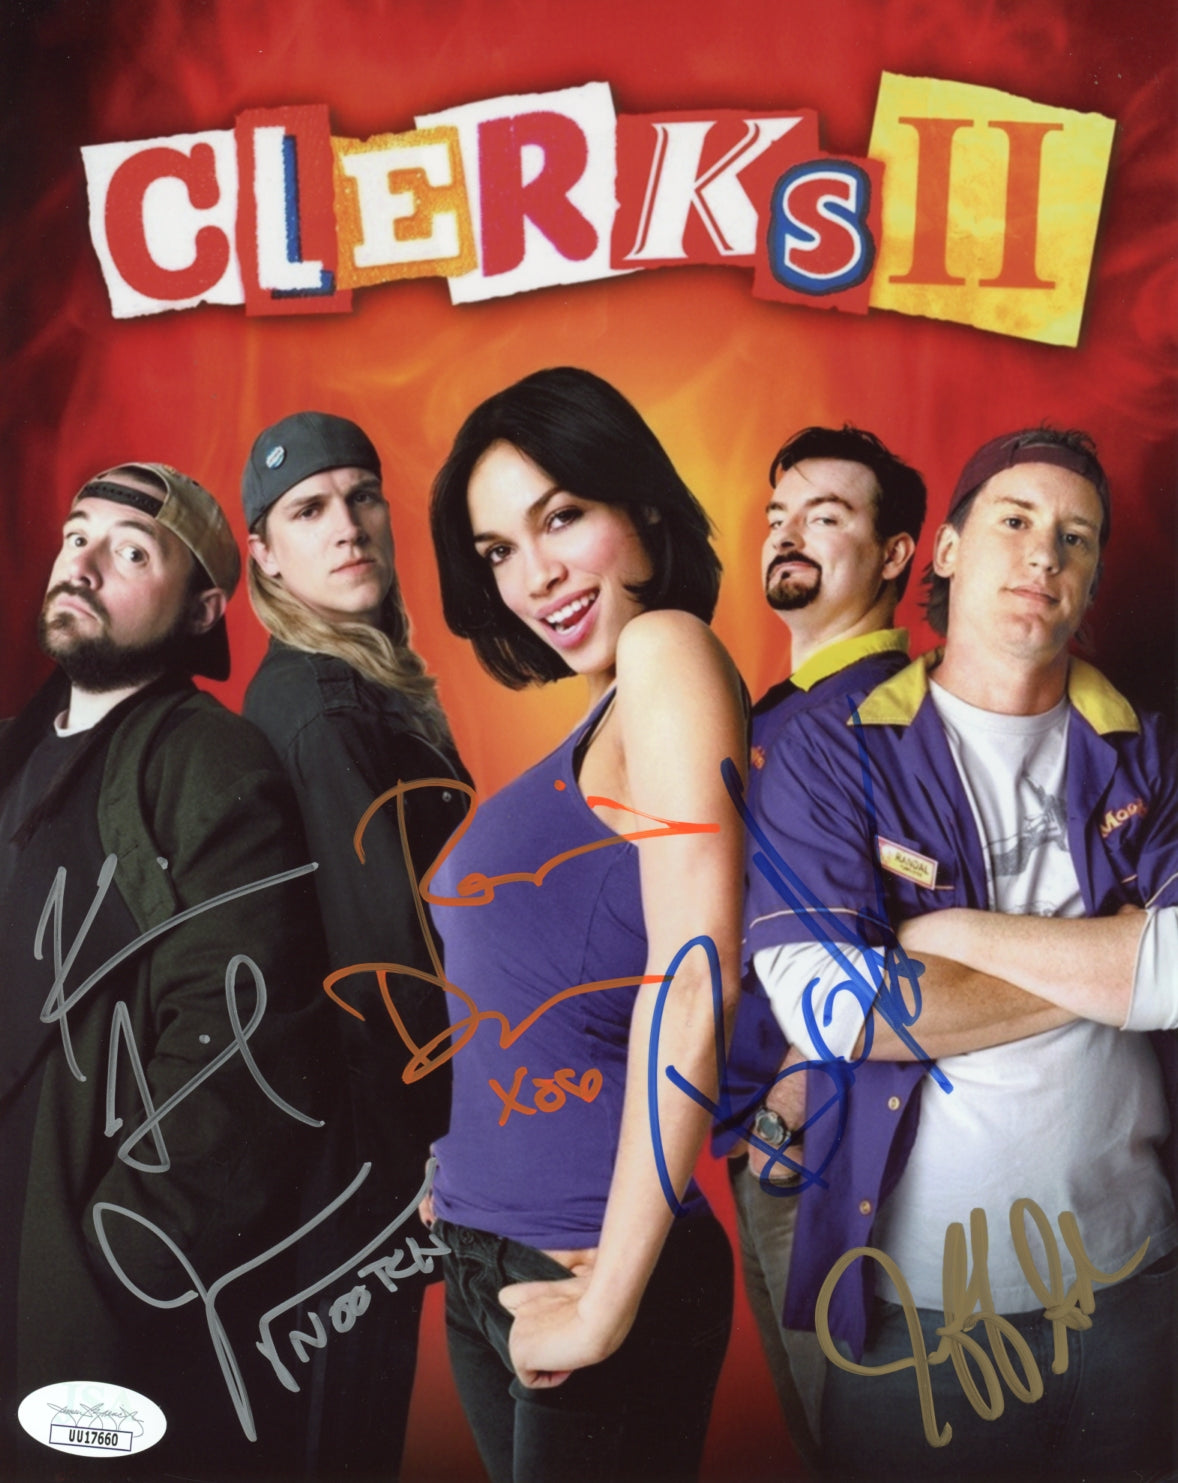 Clerks II 8x10 Signed Photo Cast x5 Anderson, Dawson, Mewes, O'Halloran, Smith JSA Certified Autograph